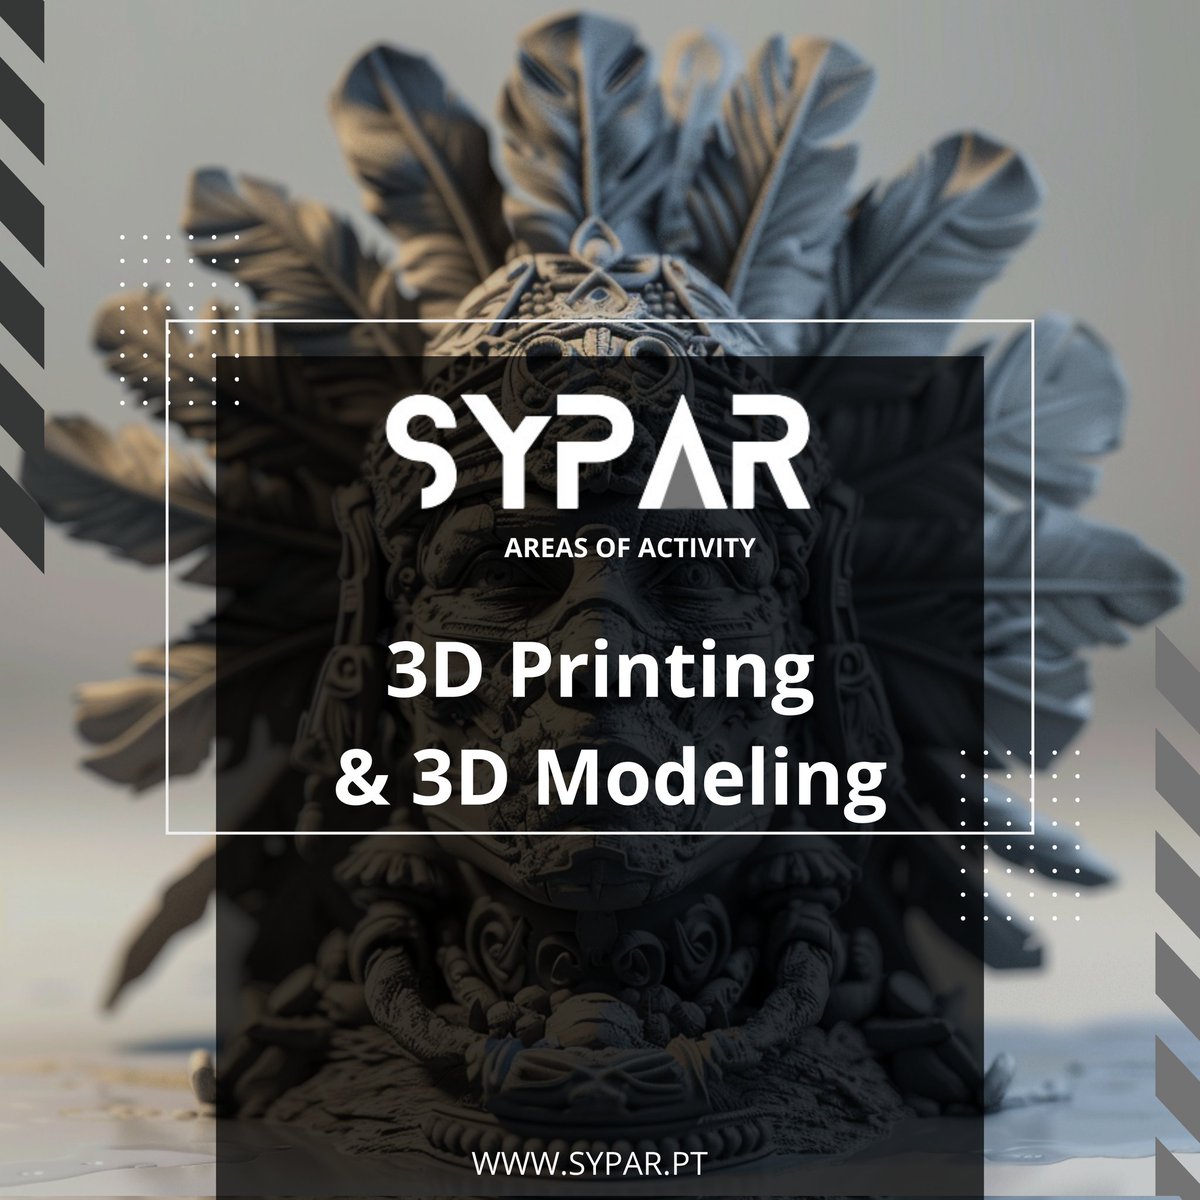 Since its emergence in the 80s, #3Dprinting/#3Dmodeling has advanced significantly, impacting industries like architecture, fashion, & biotechnology. This additive process constructs objects from #digital models by layering materials such as metals, plastics, & even chocolate.